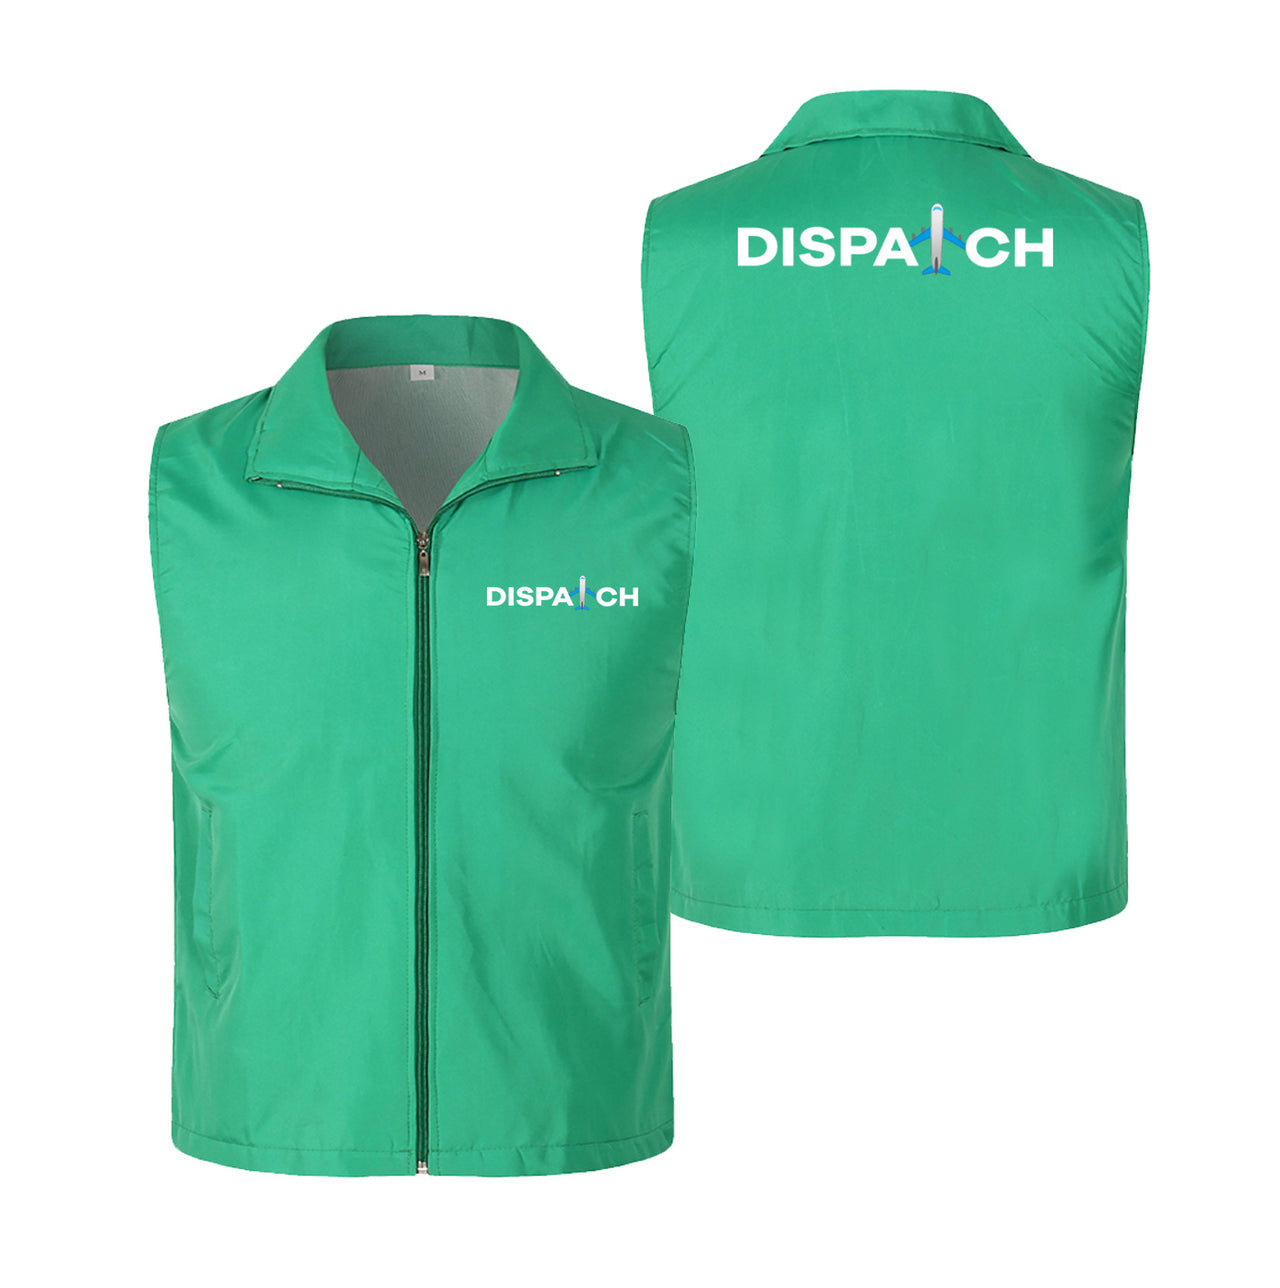 Dispatch Designed Thin Style Vests